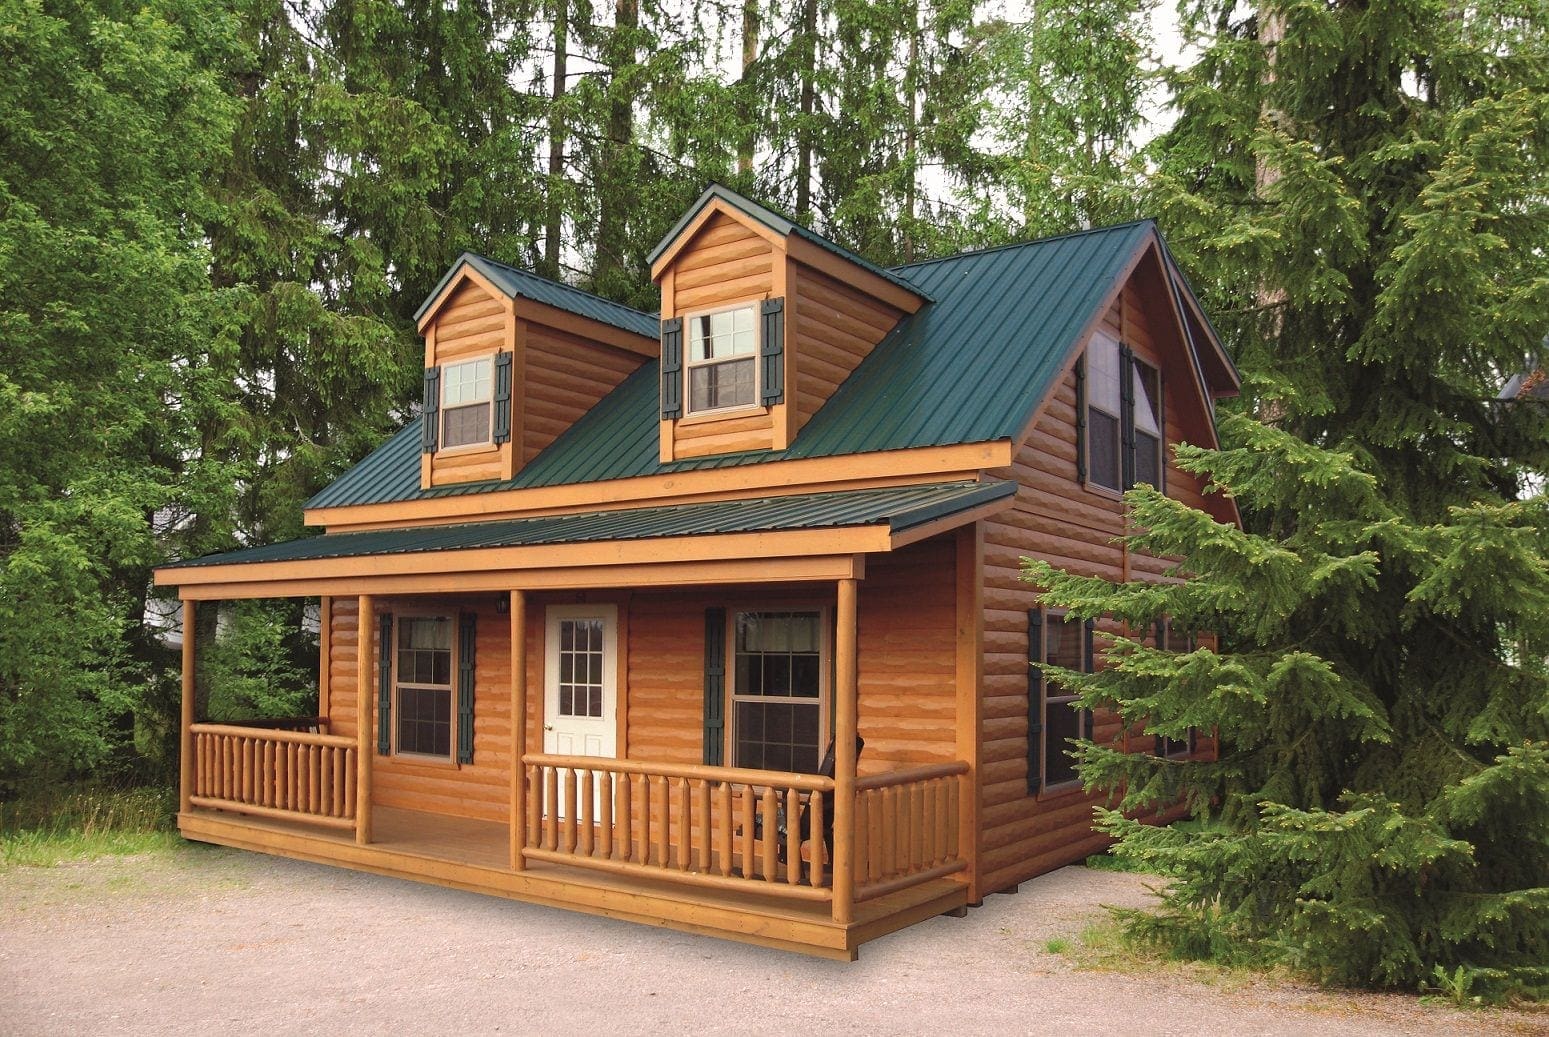 Rivewrood log cabin kit by Woodtex featuring a kit in a clearing in a row of pine trees